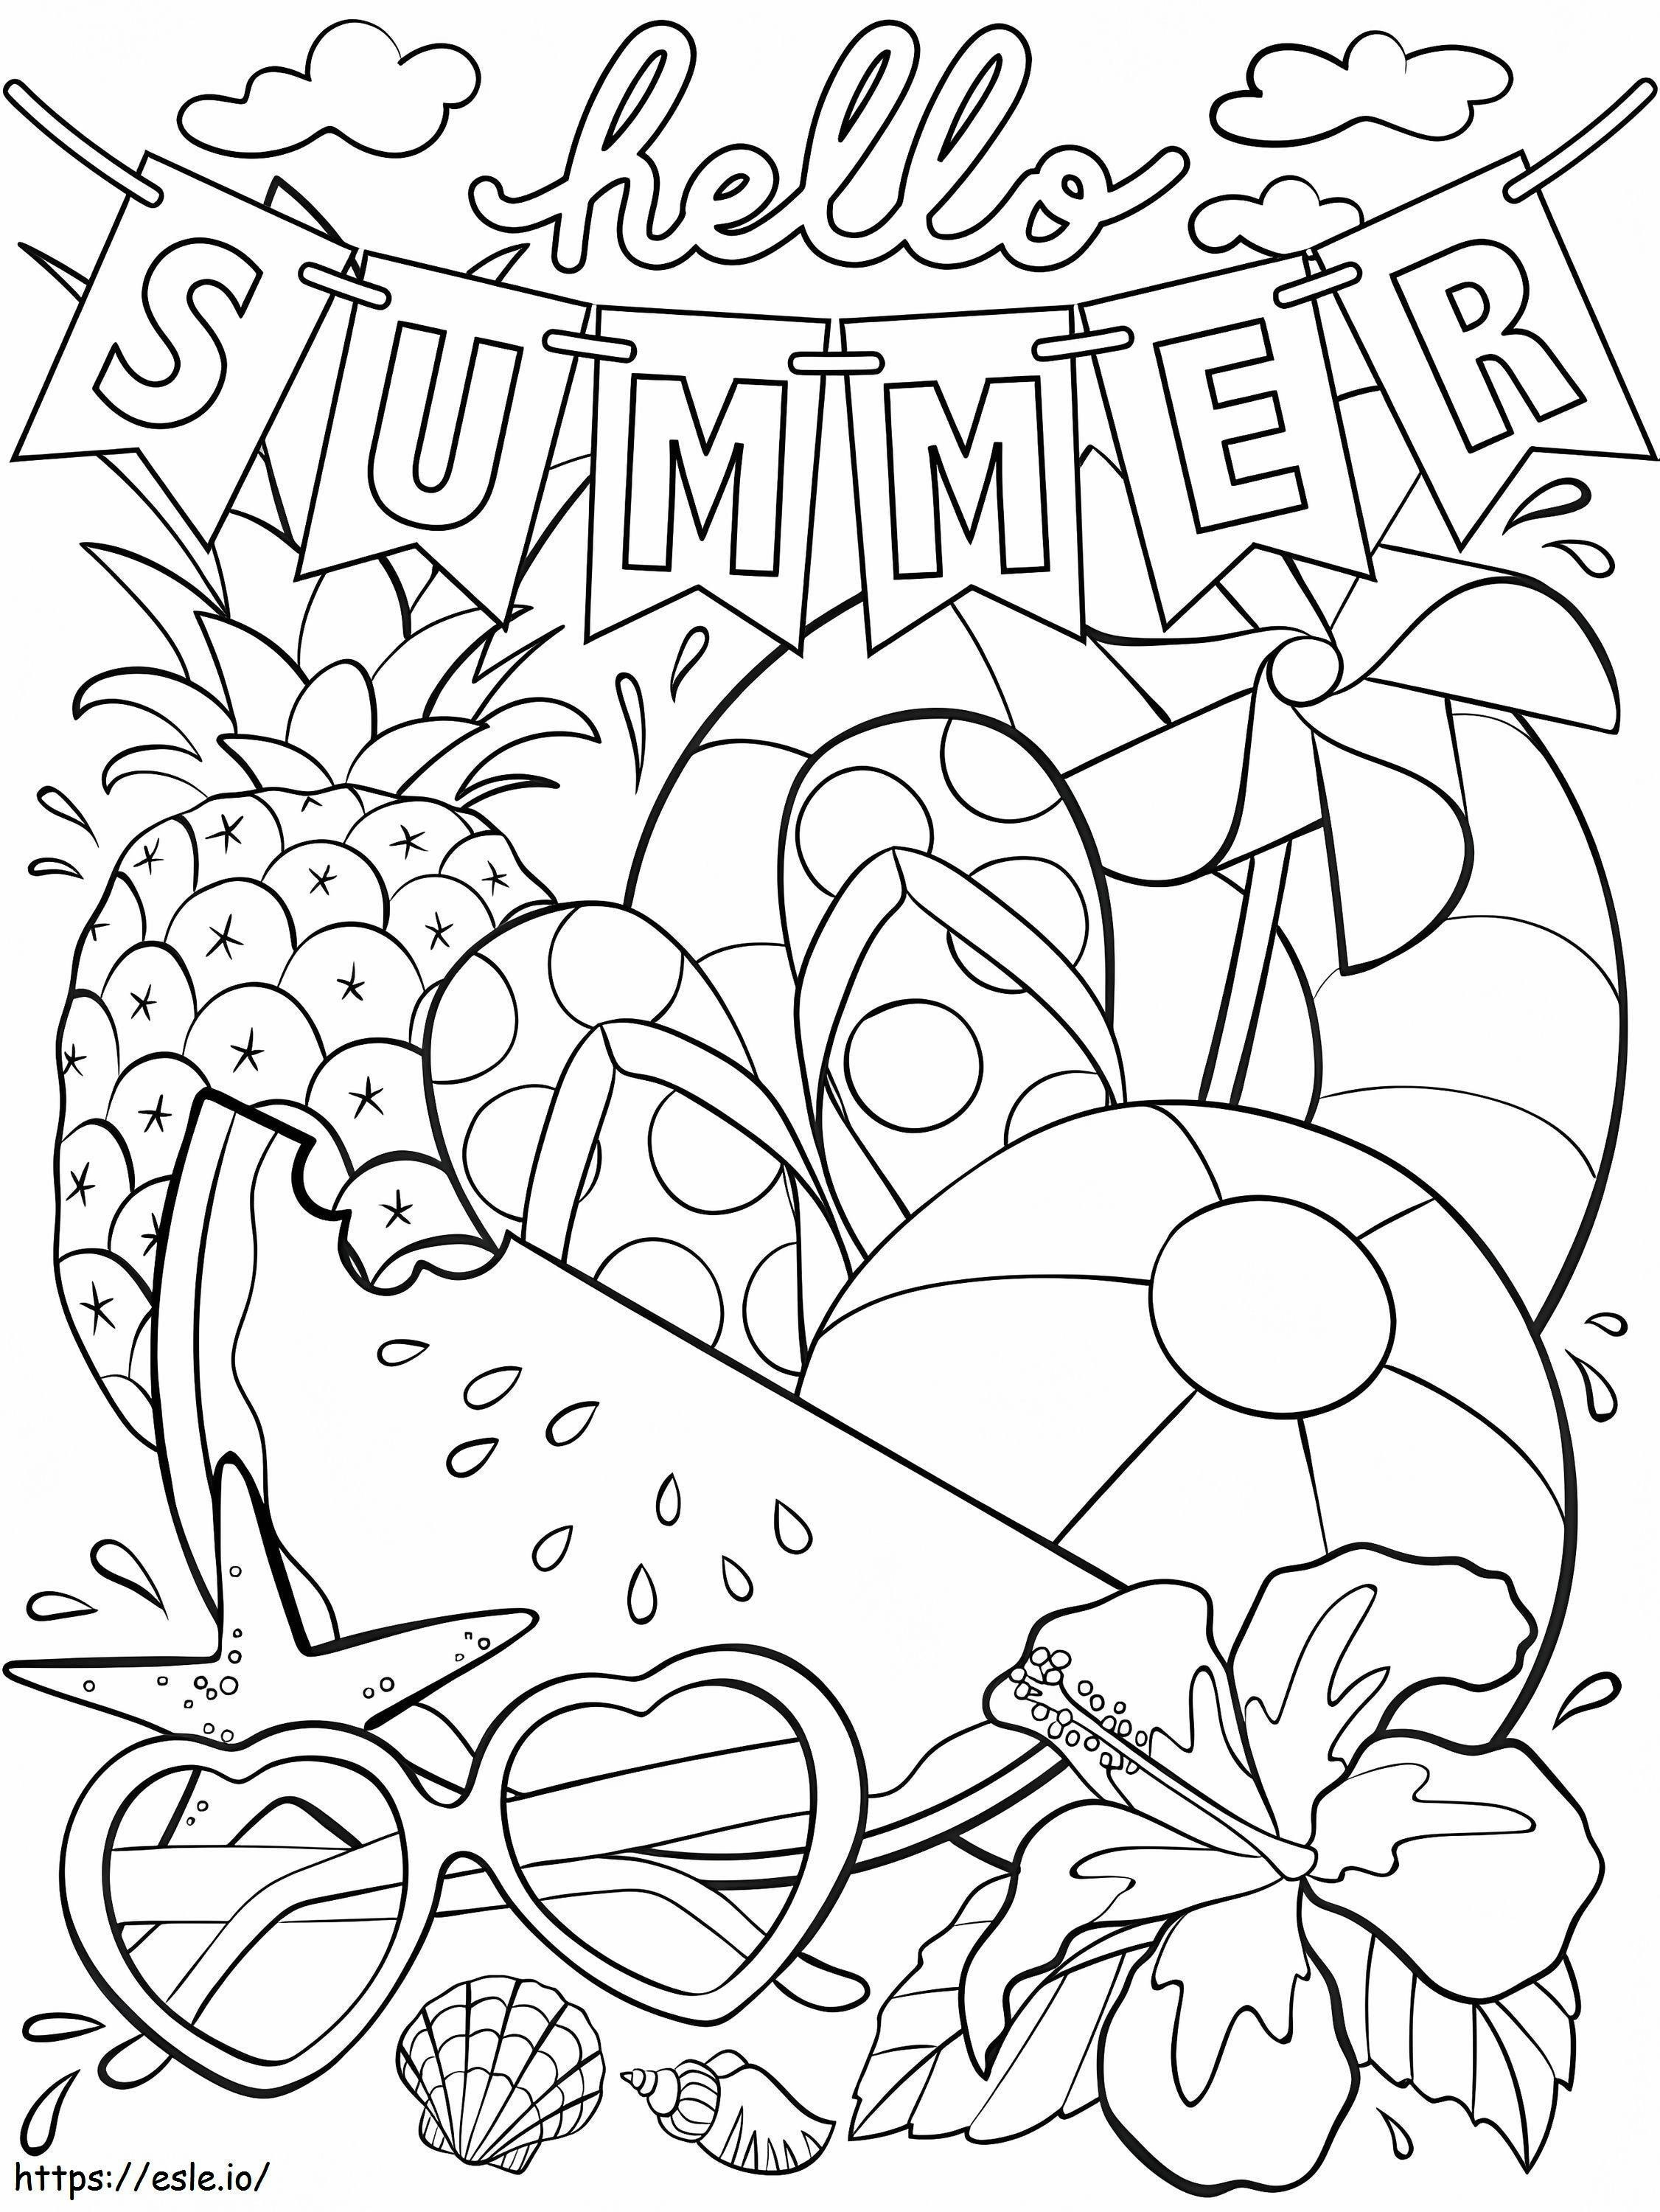 Summer Things coloring page